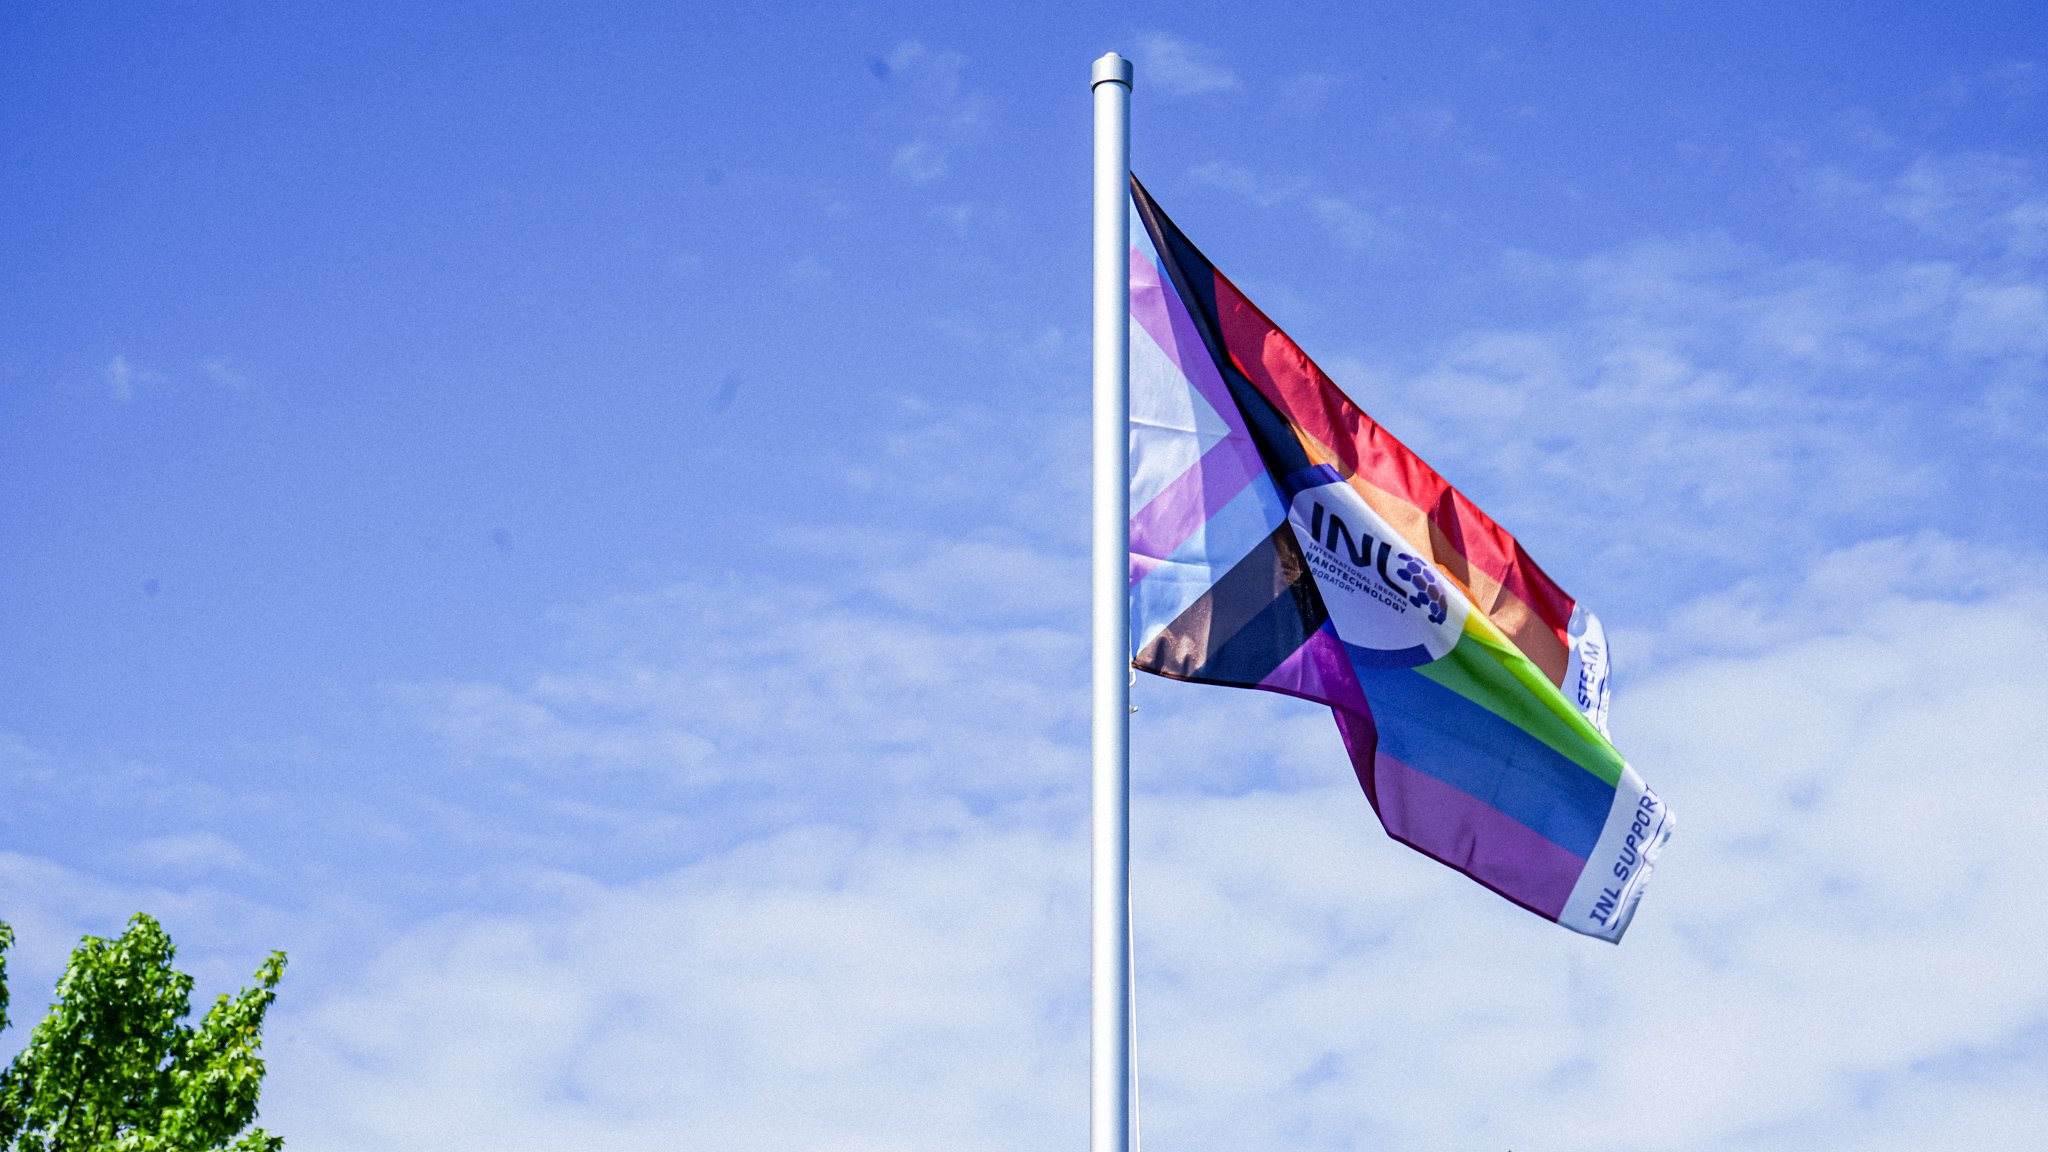 INL is proudly flying the Progress Pride Flag